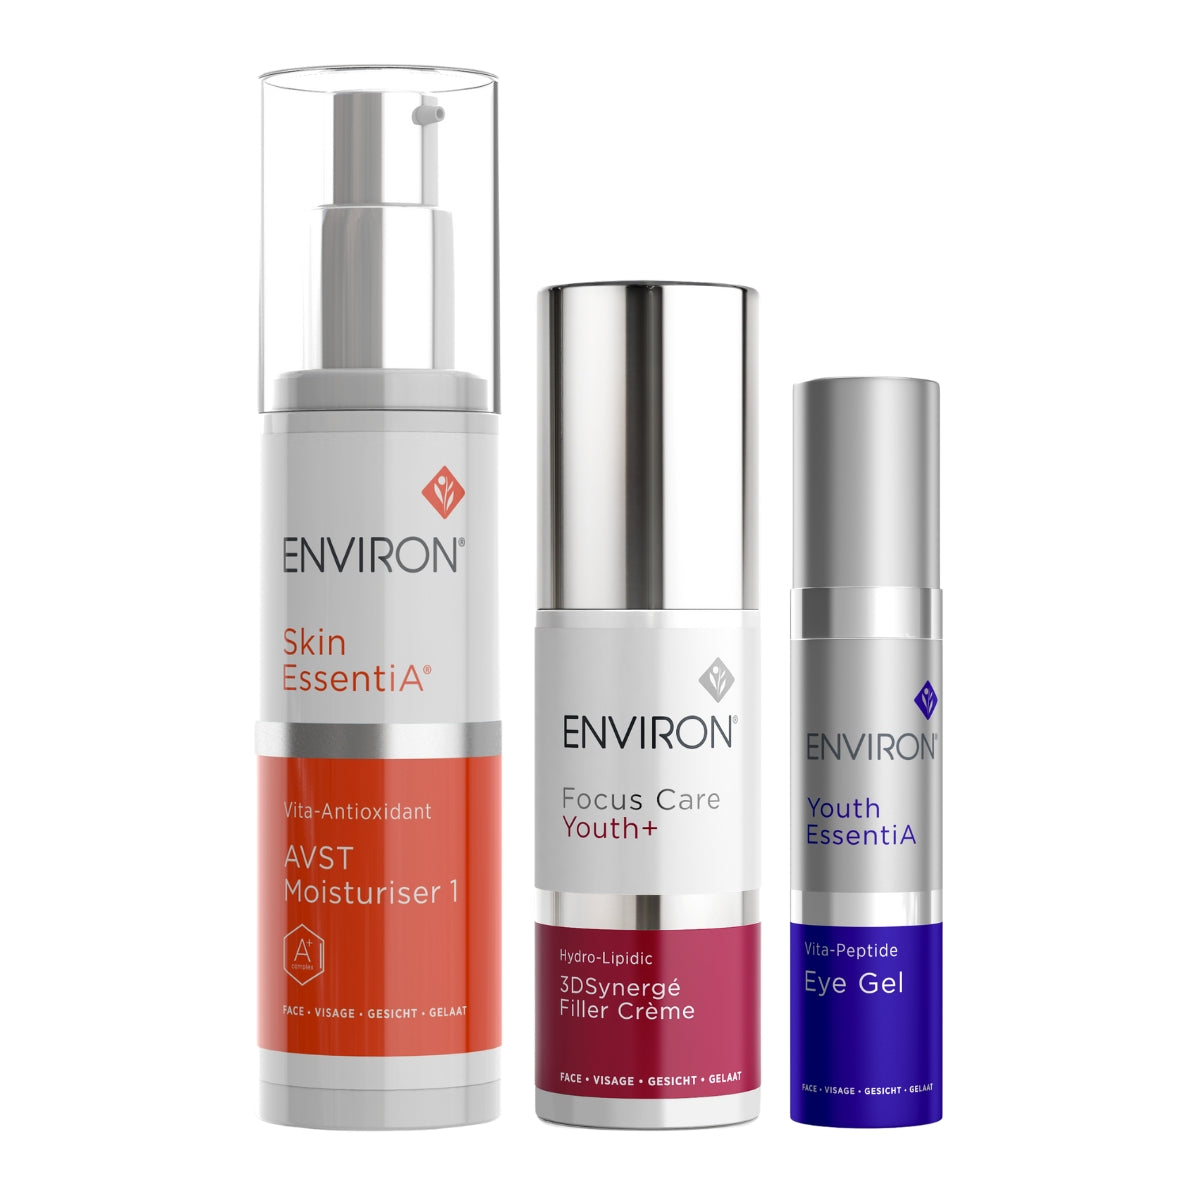 Environ Youthful Heroes Bundle – Exclusively from Millies